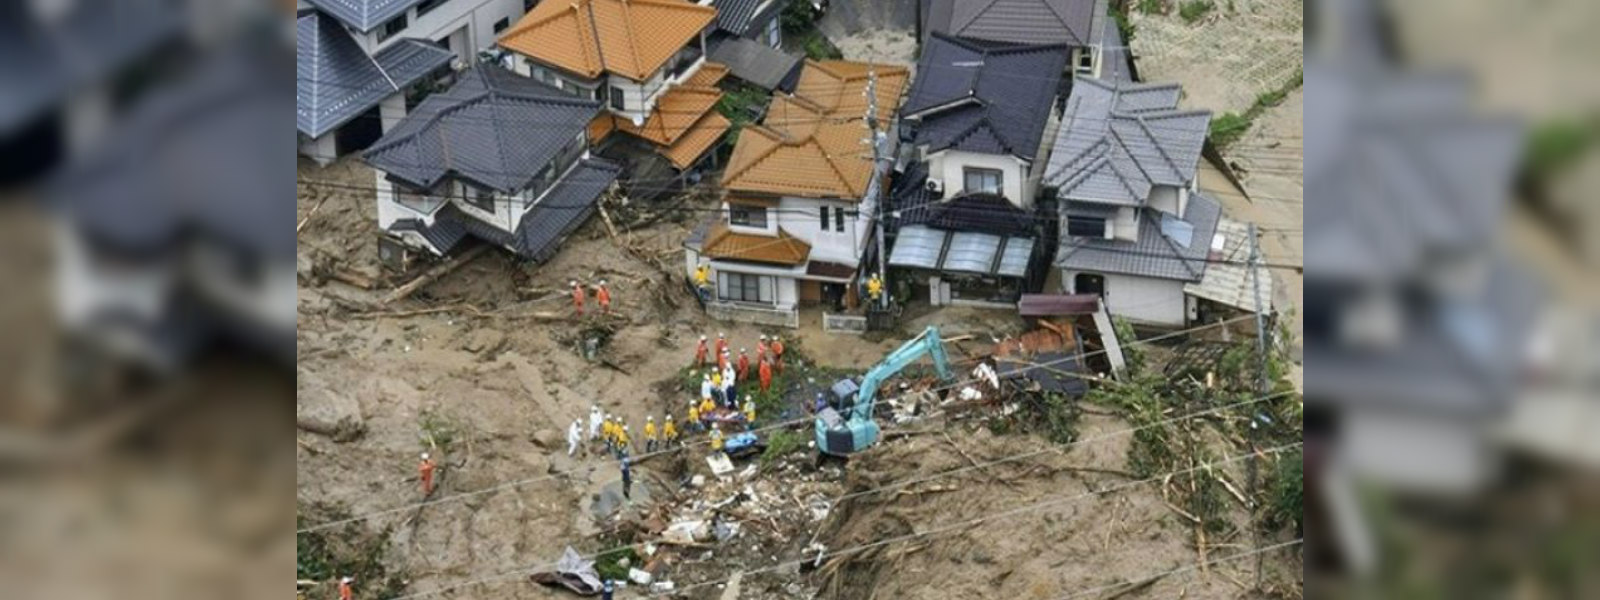 11 killed as torrential rain pounds Japan